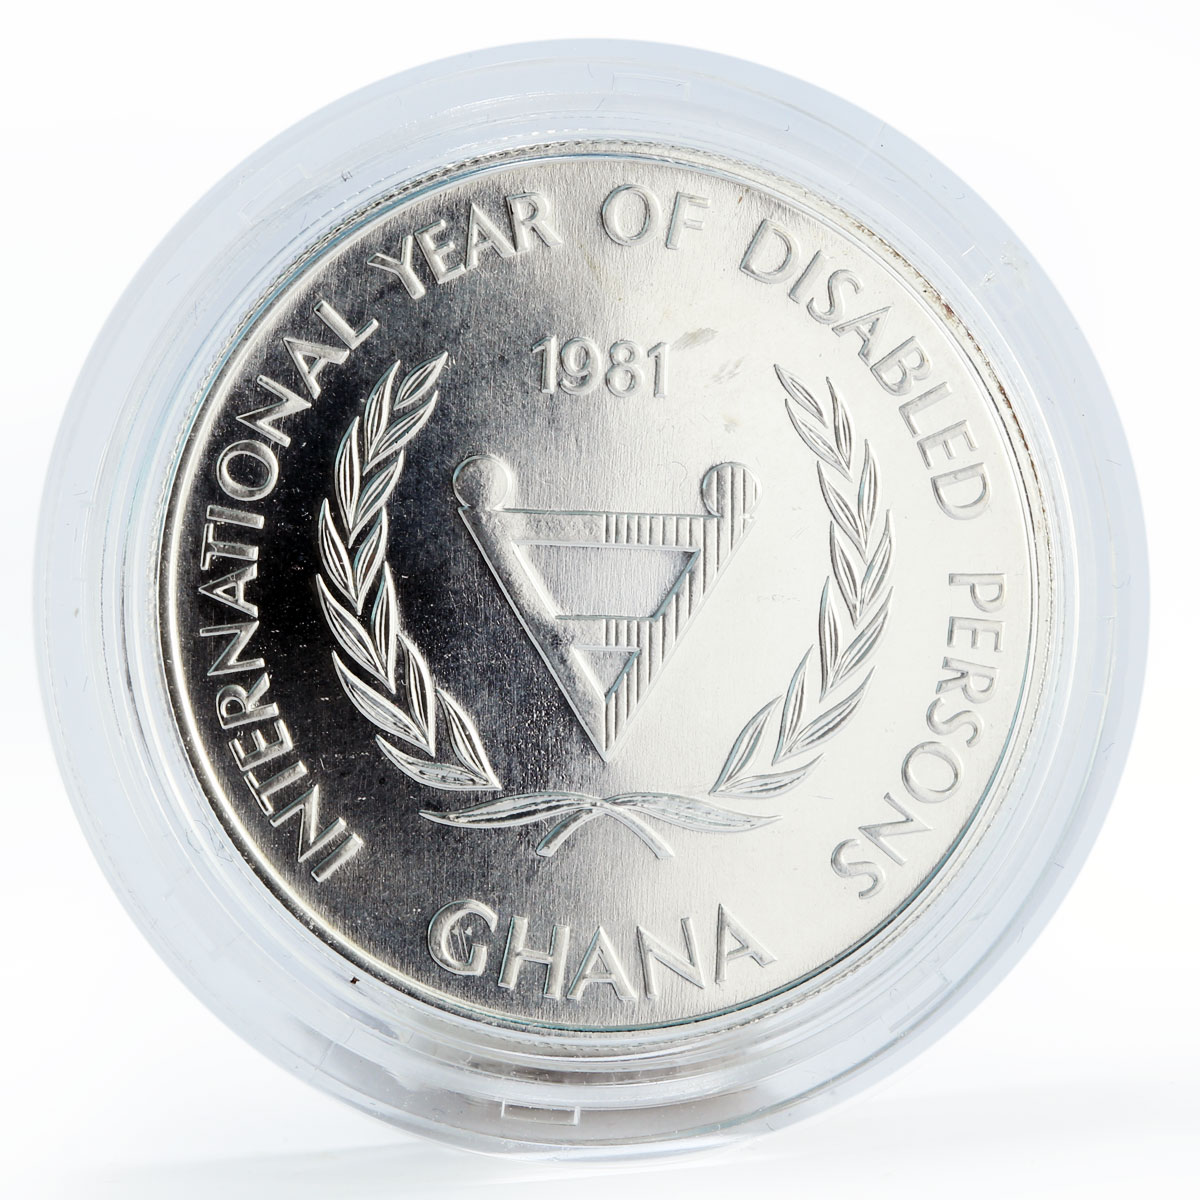 Ghana 50 cedis International Year of Disabled Persons proof silver coin 1981